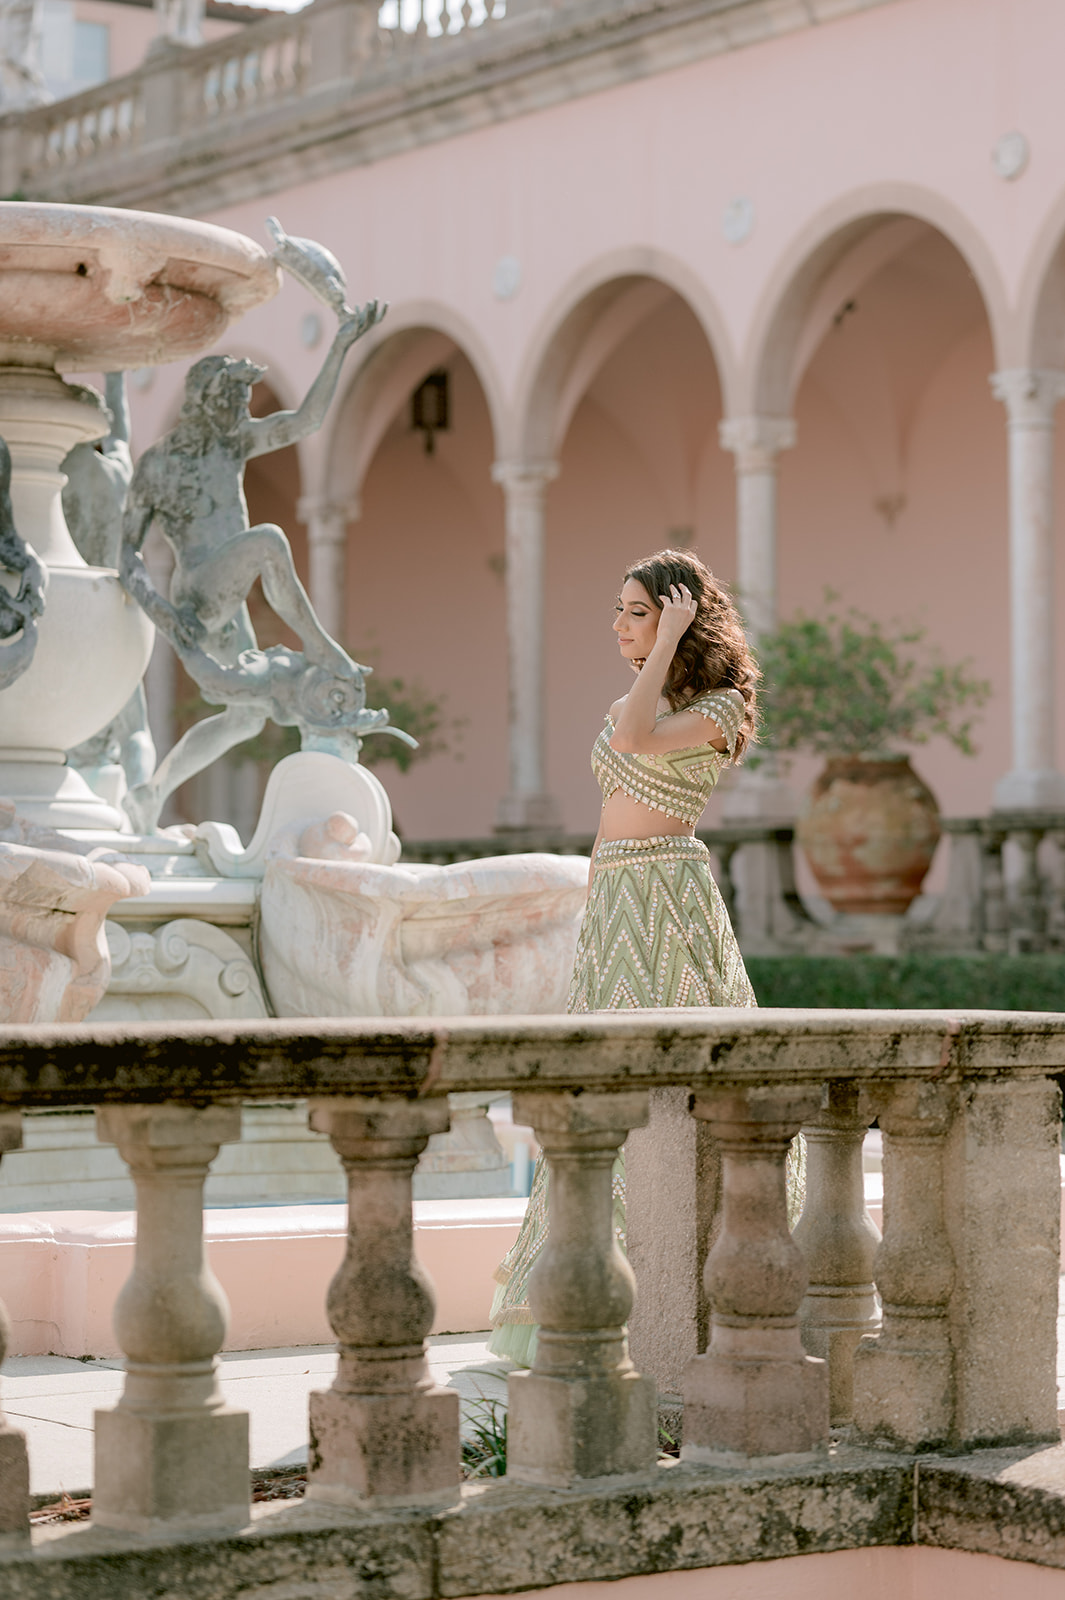 "Indian bride and groom showcasing their love at the Ringling Museum's Ca' d'Zan mansion"
